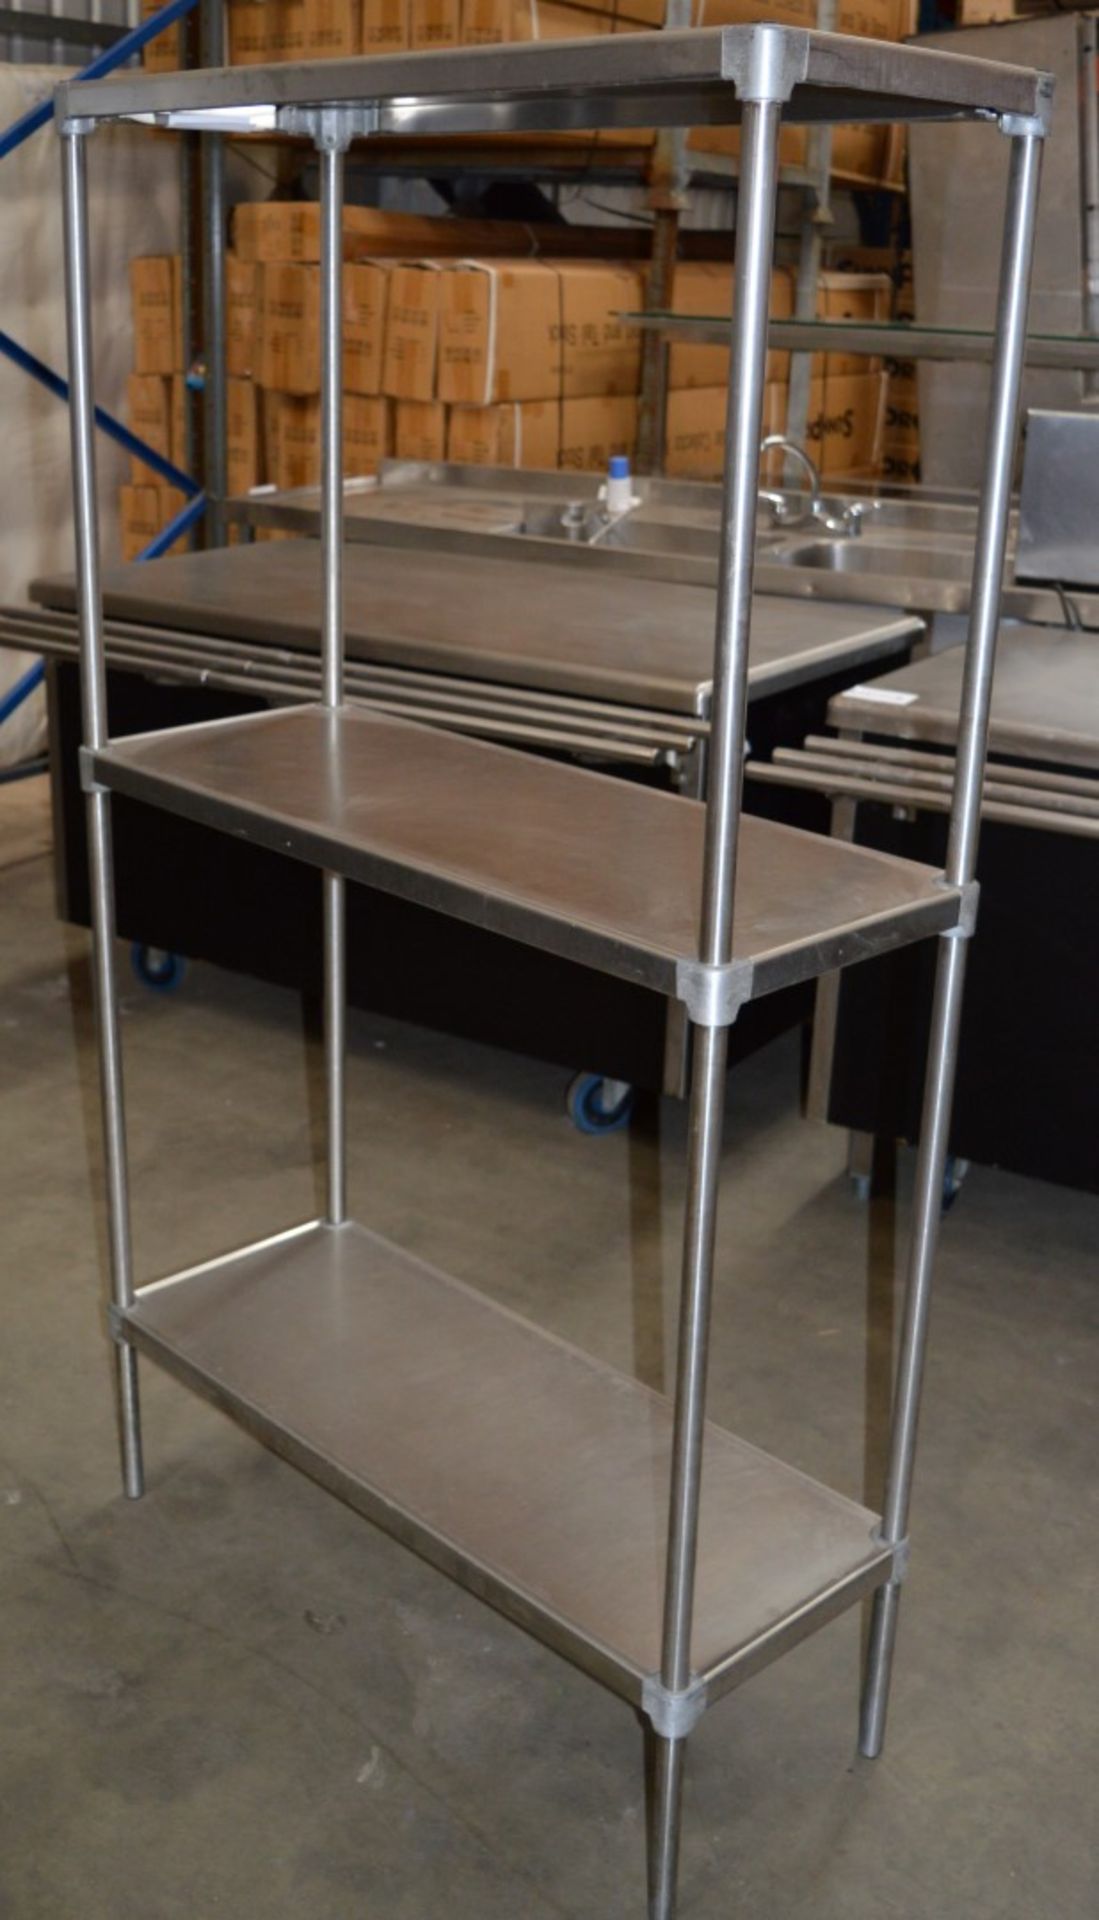 1 x Stainless Steel Drip Proof 3 Tier Shelving Unit - Suitable For Commercial Kitchen Environments -